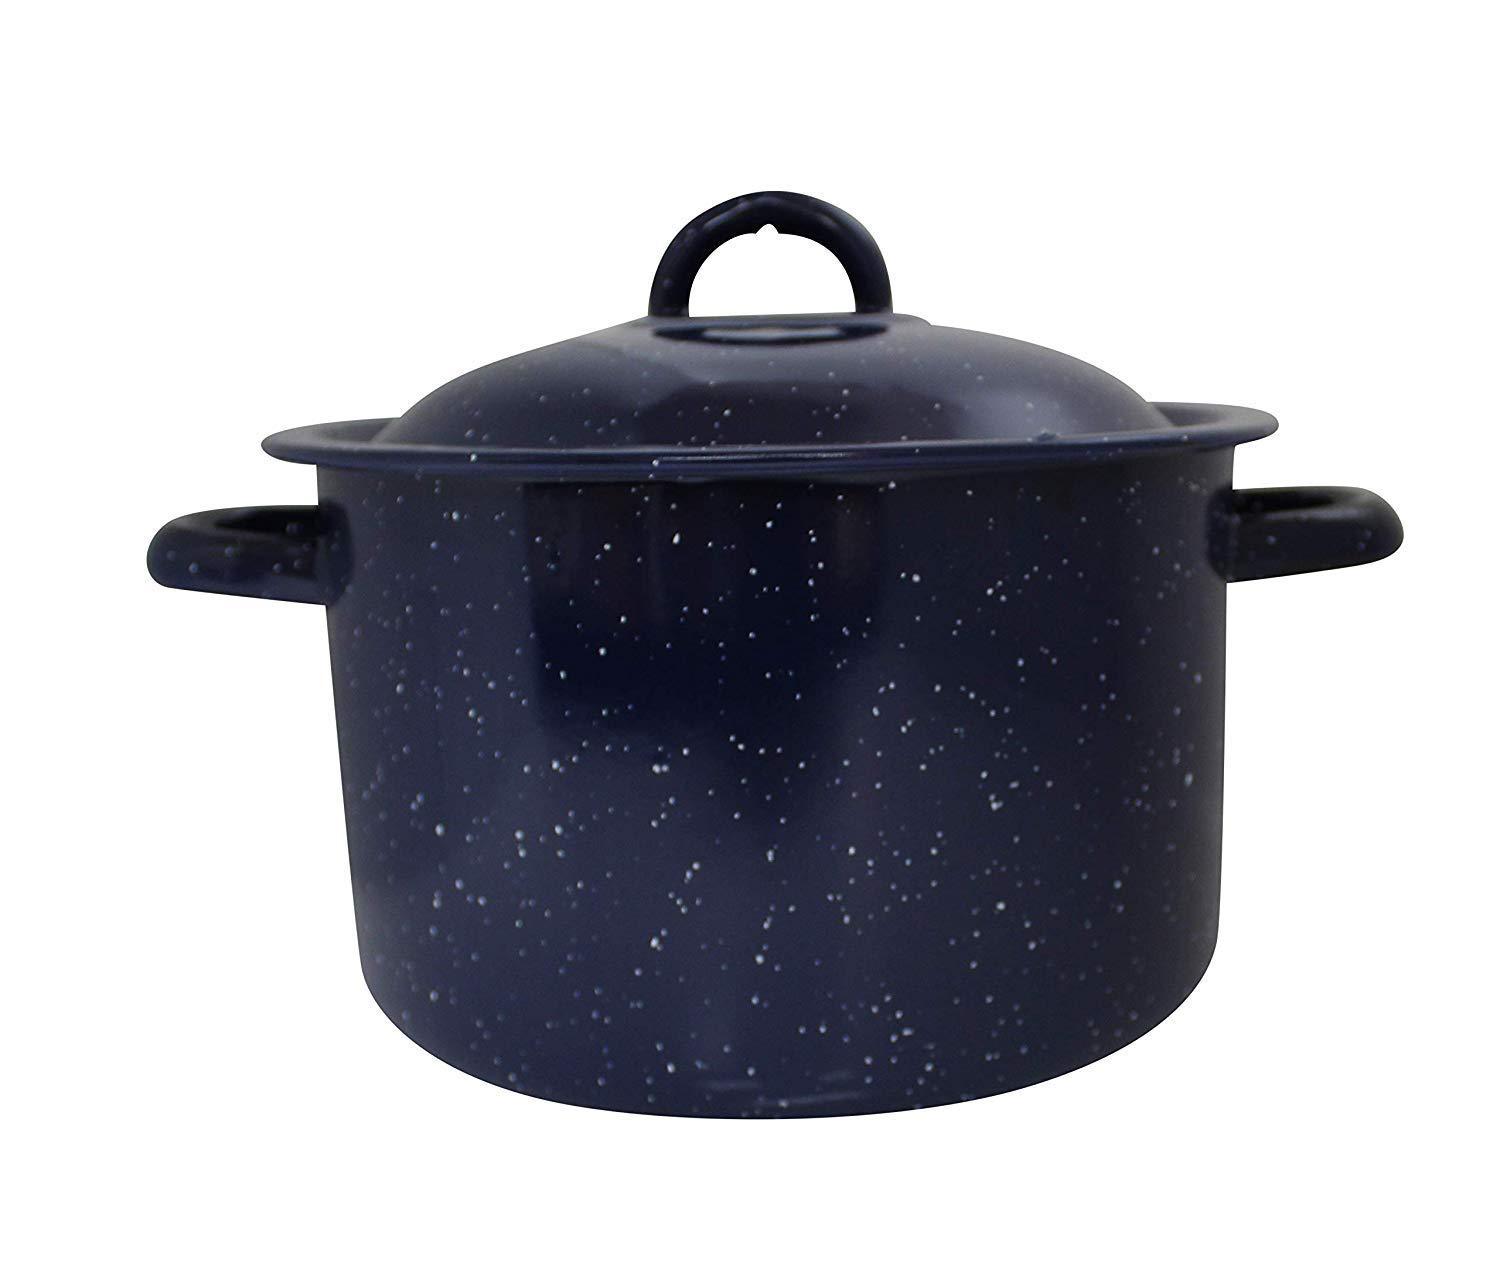 IMUSA USA 4-Quart Blue Speckled Enamel Stock Pot with Lid - CookCave